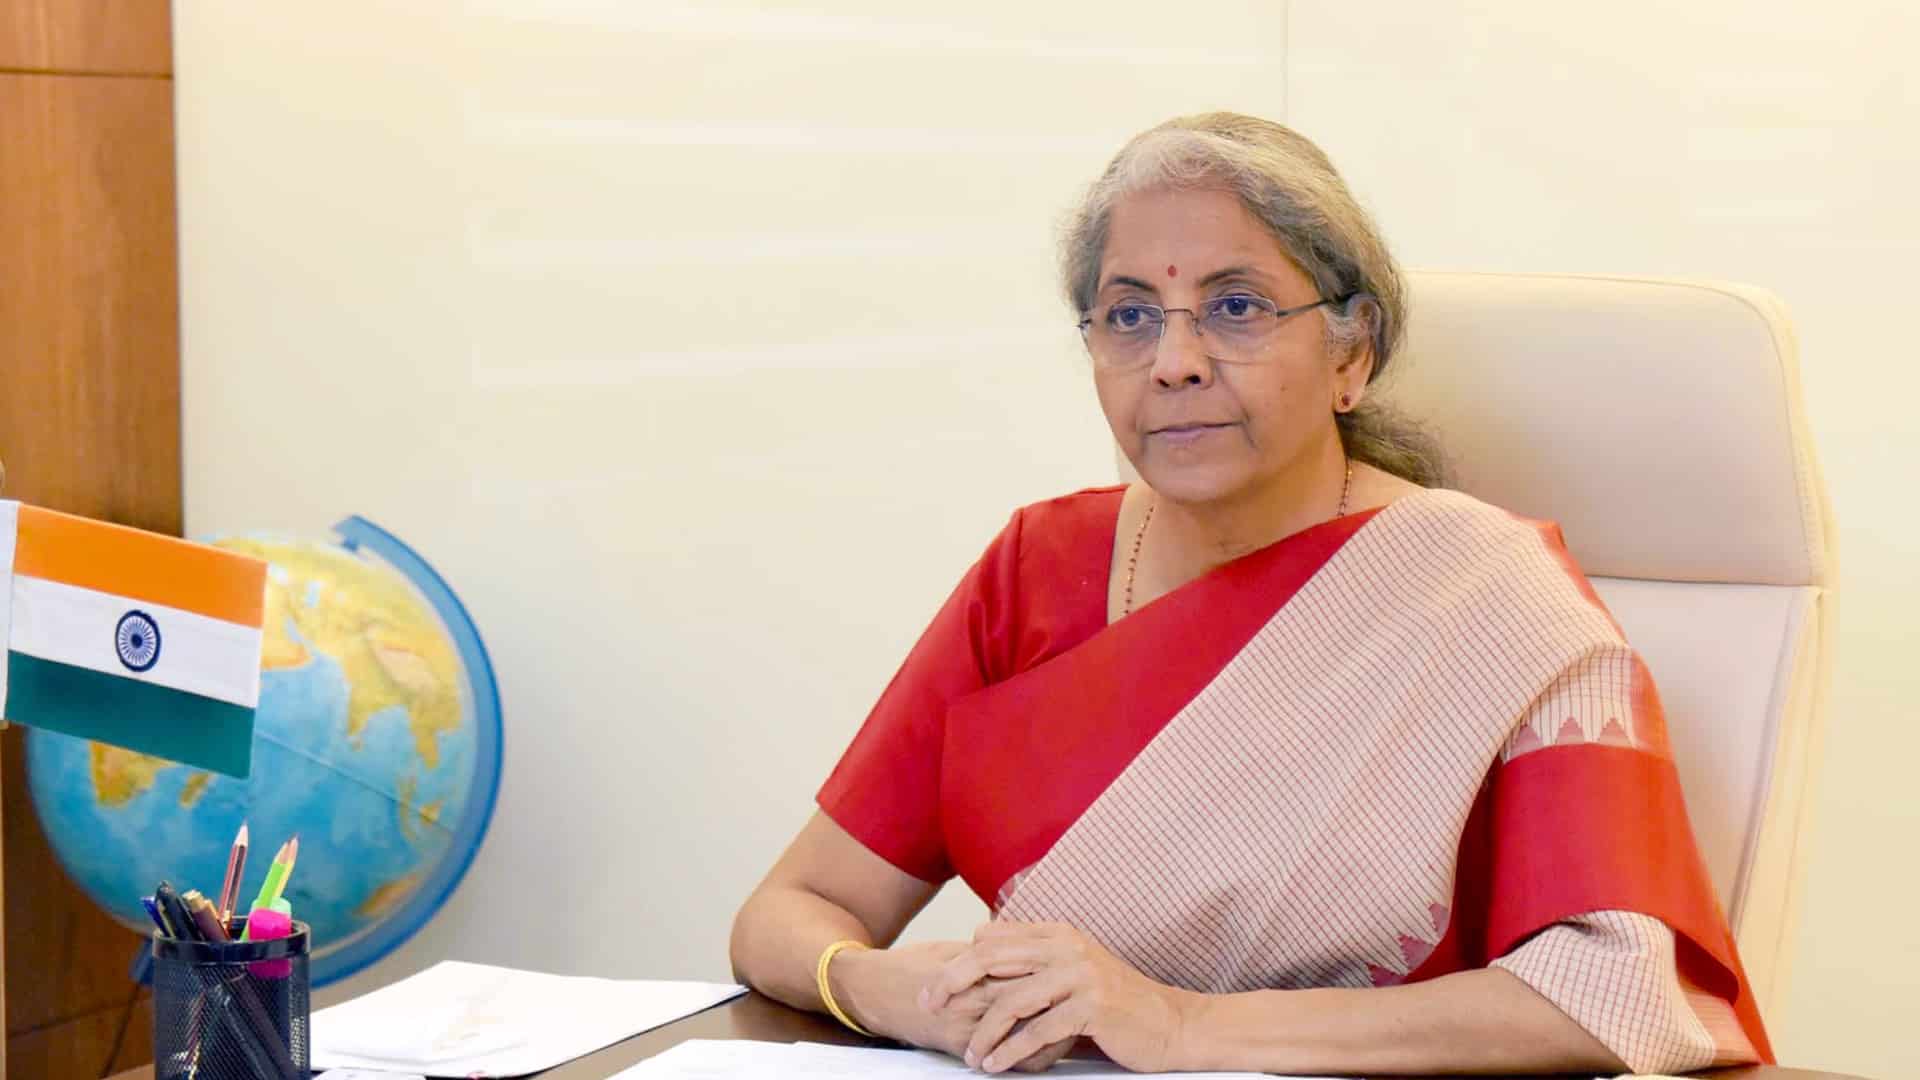 FM Nirmala Sitharaman to arrive in US to participate in IMF-WB meeting; to meet Treasury Secretary